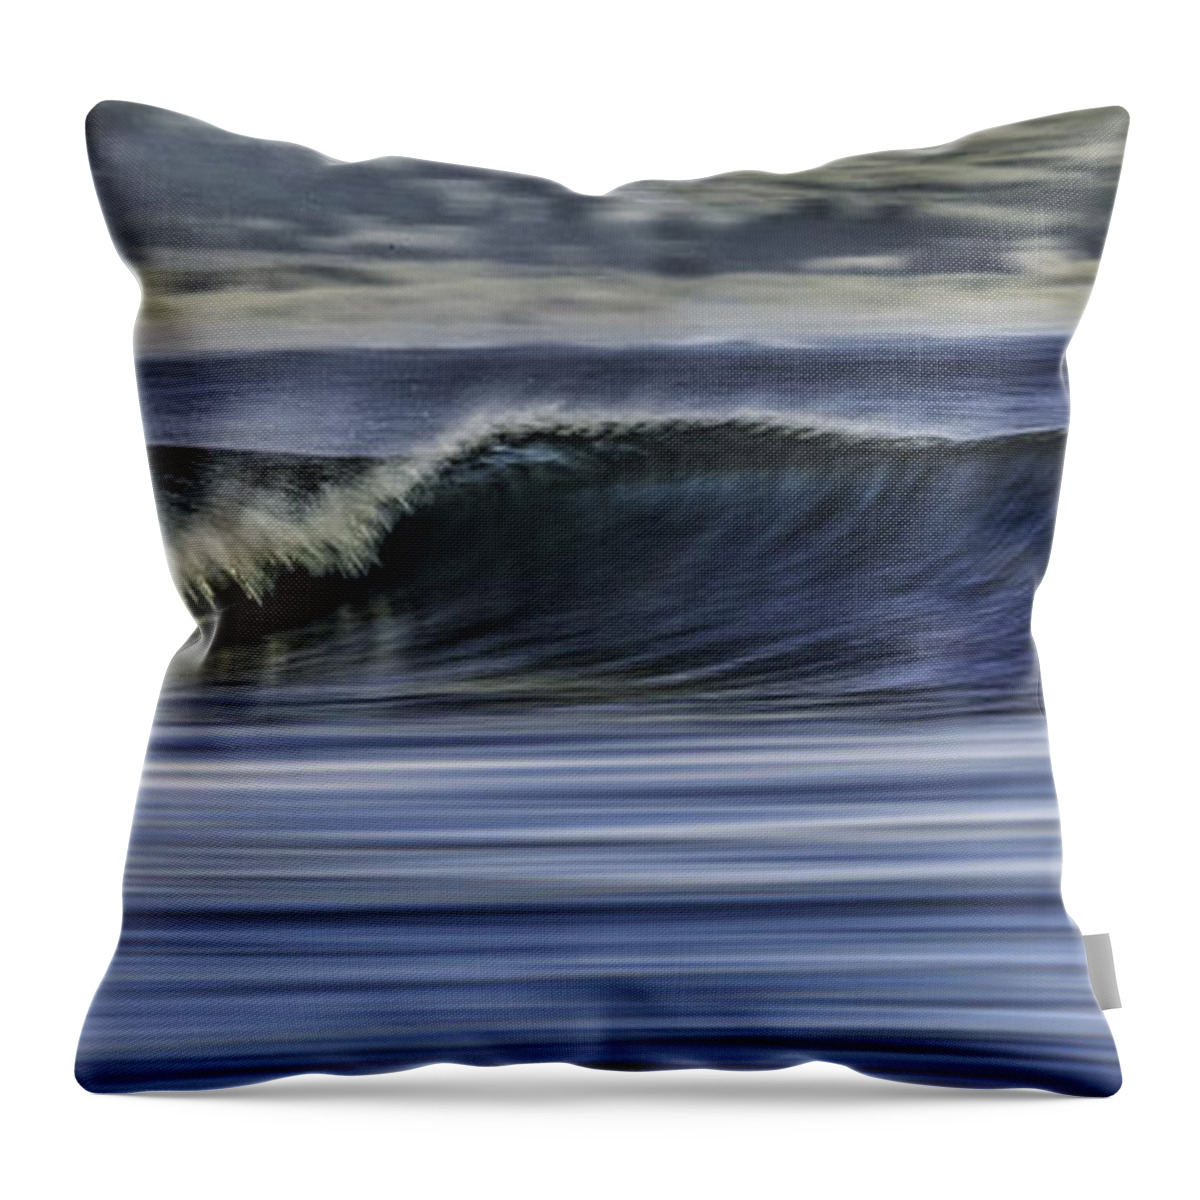 Drakes Beach Throw Pillow featuring the photograph Drakes Beach by Don Hoekwater Photography